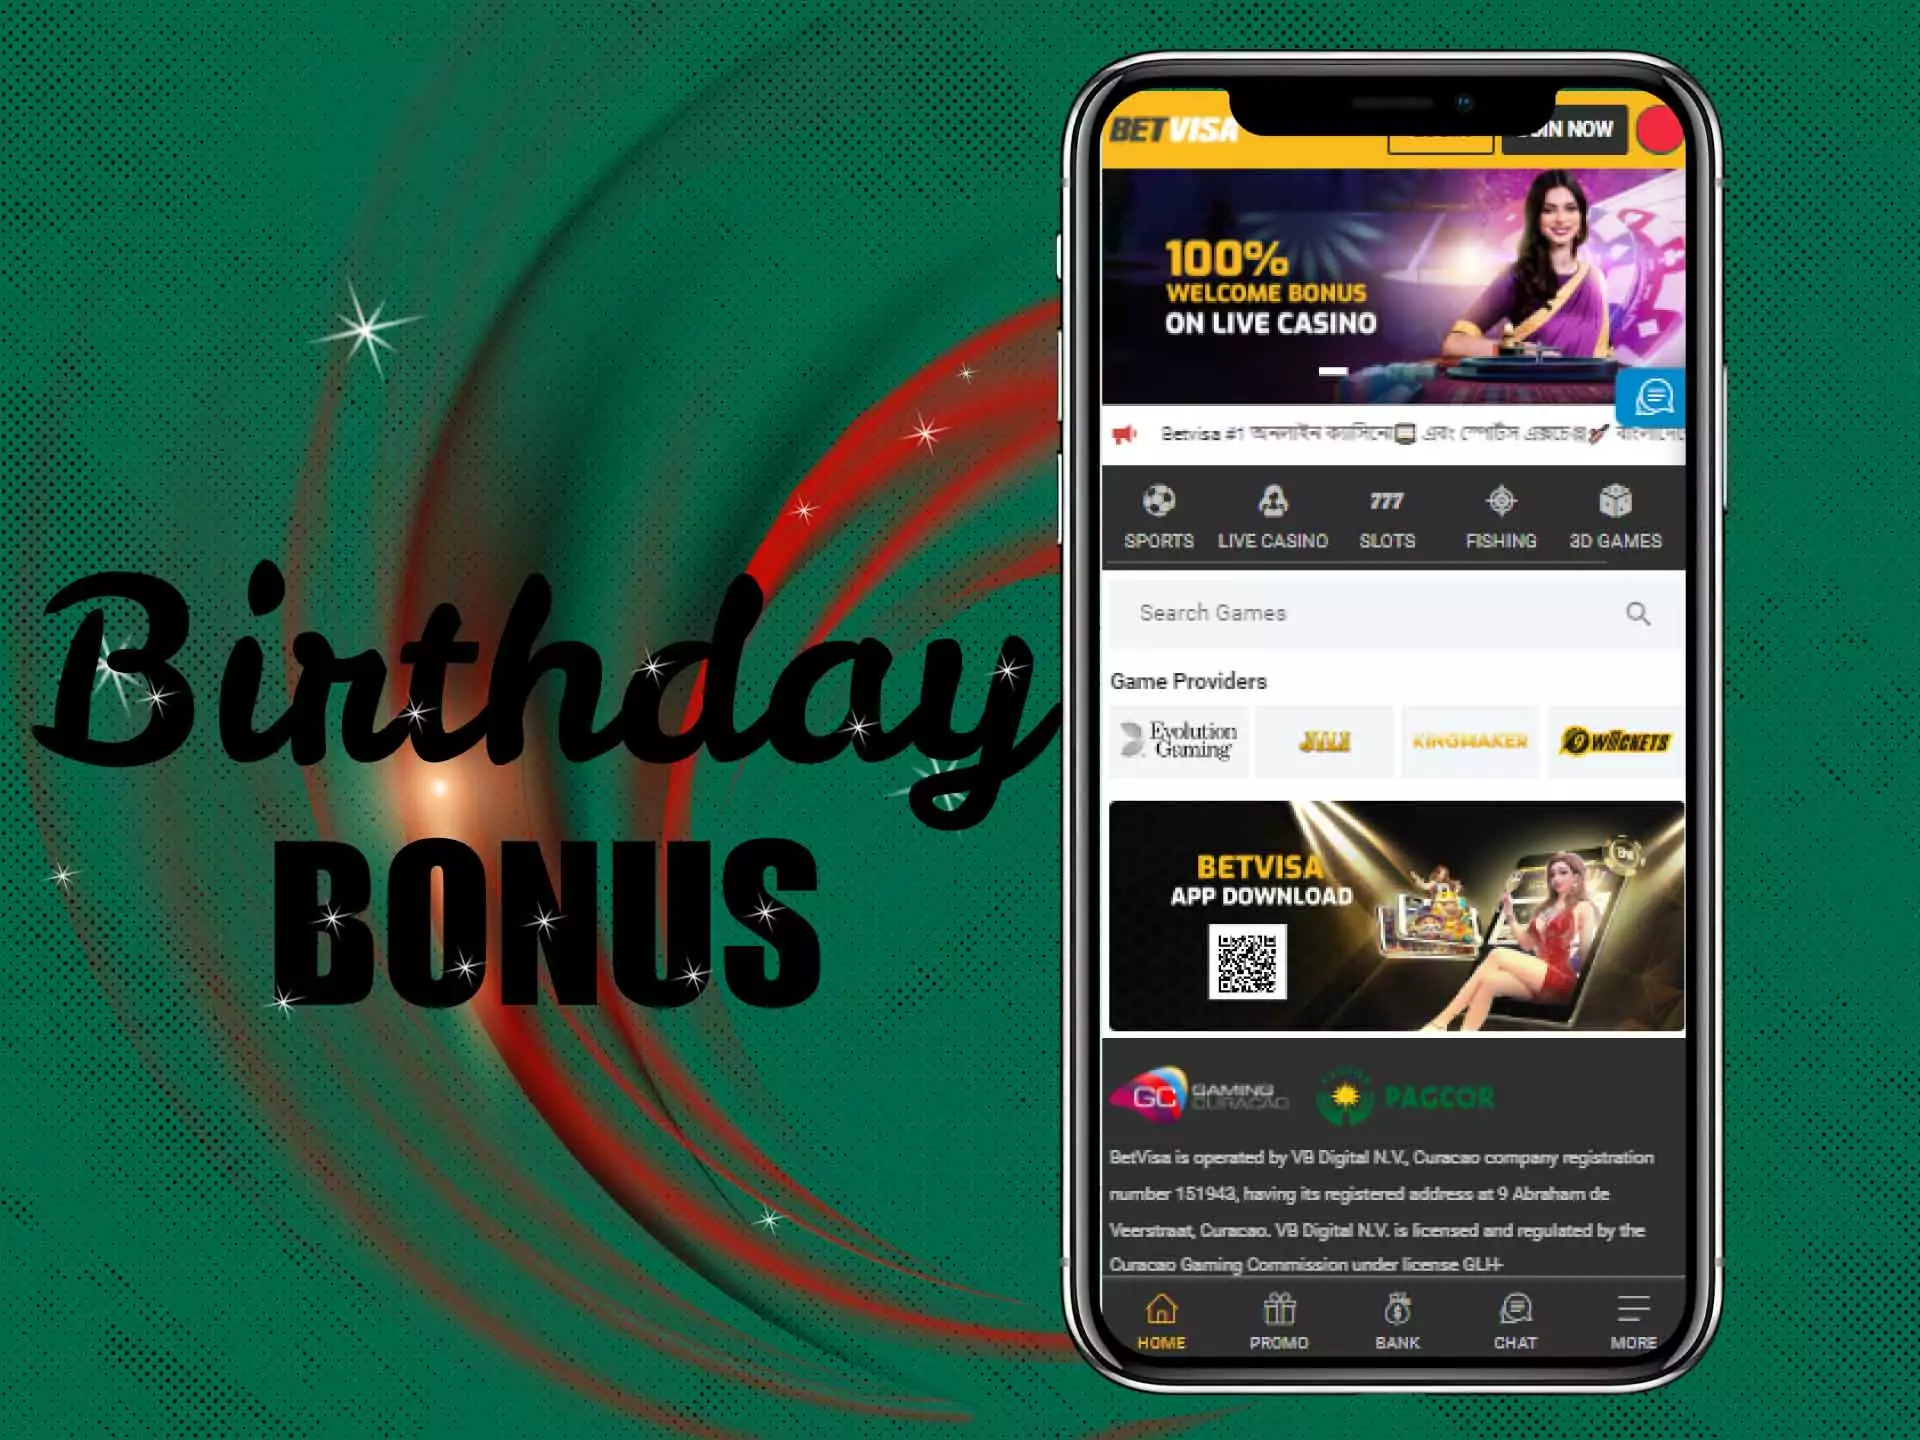 Every player can receive an additional bonus on his birthday.